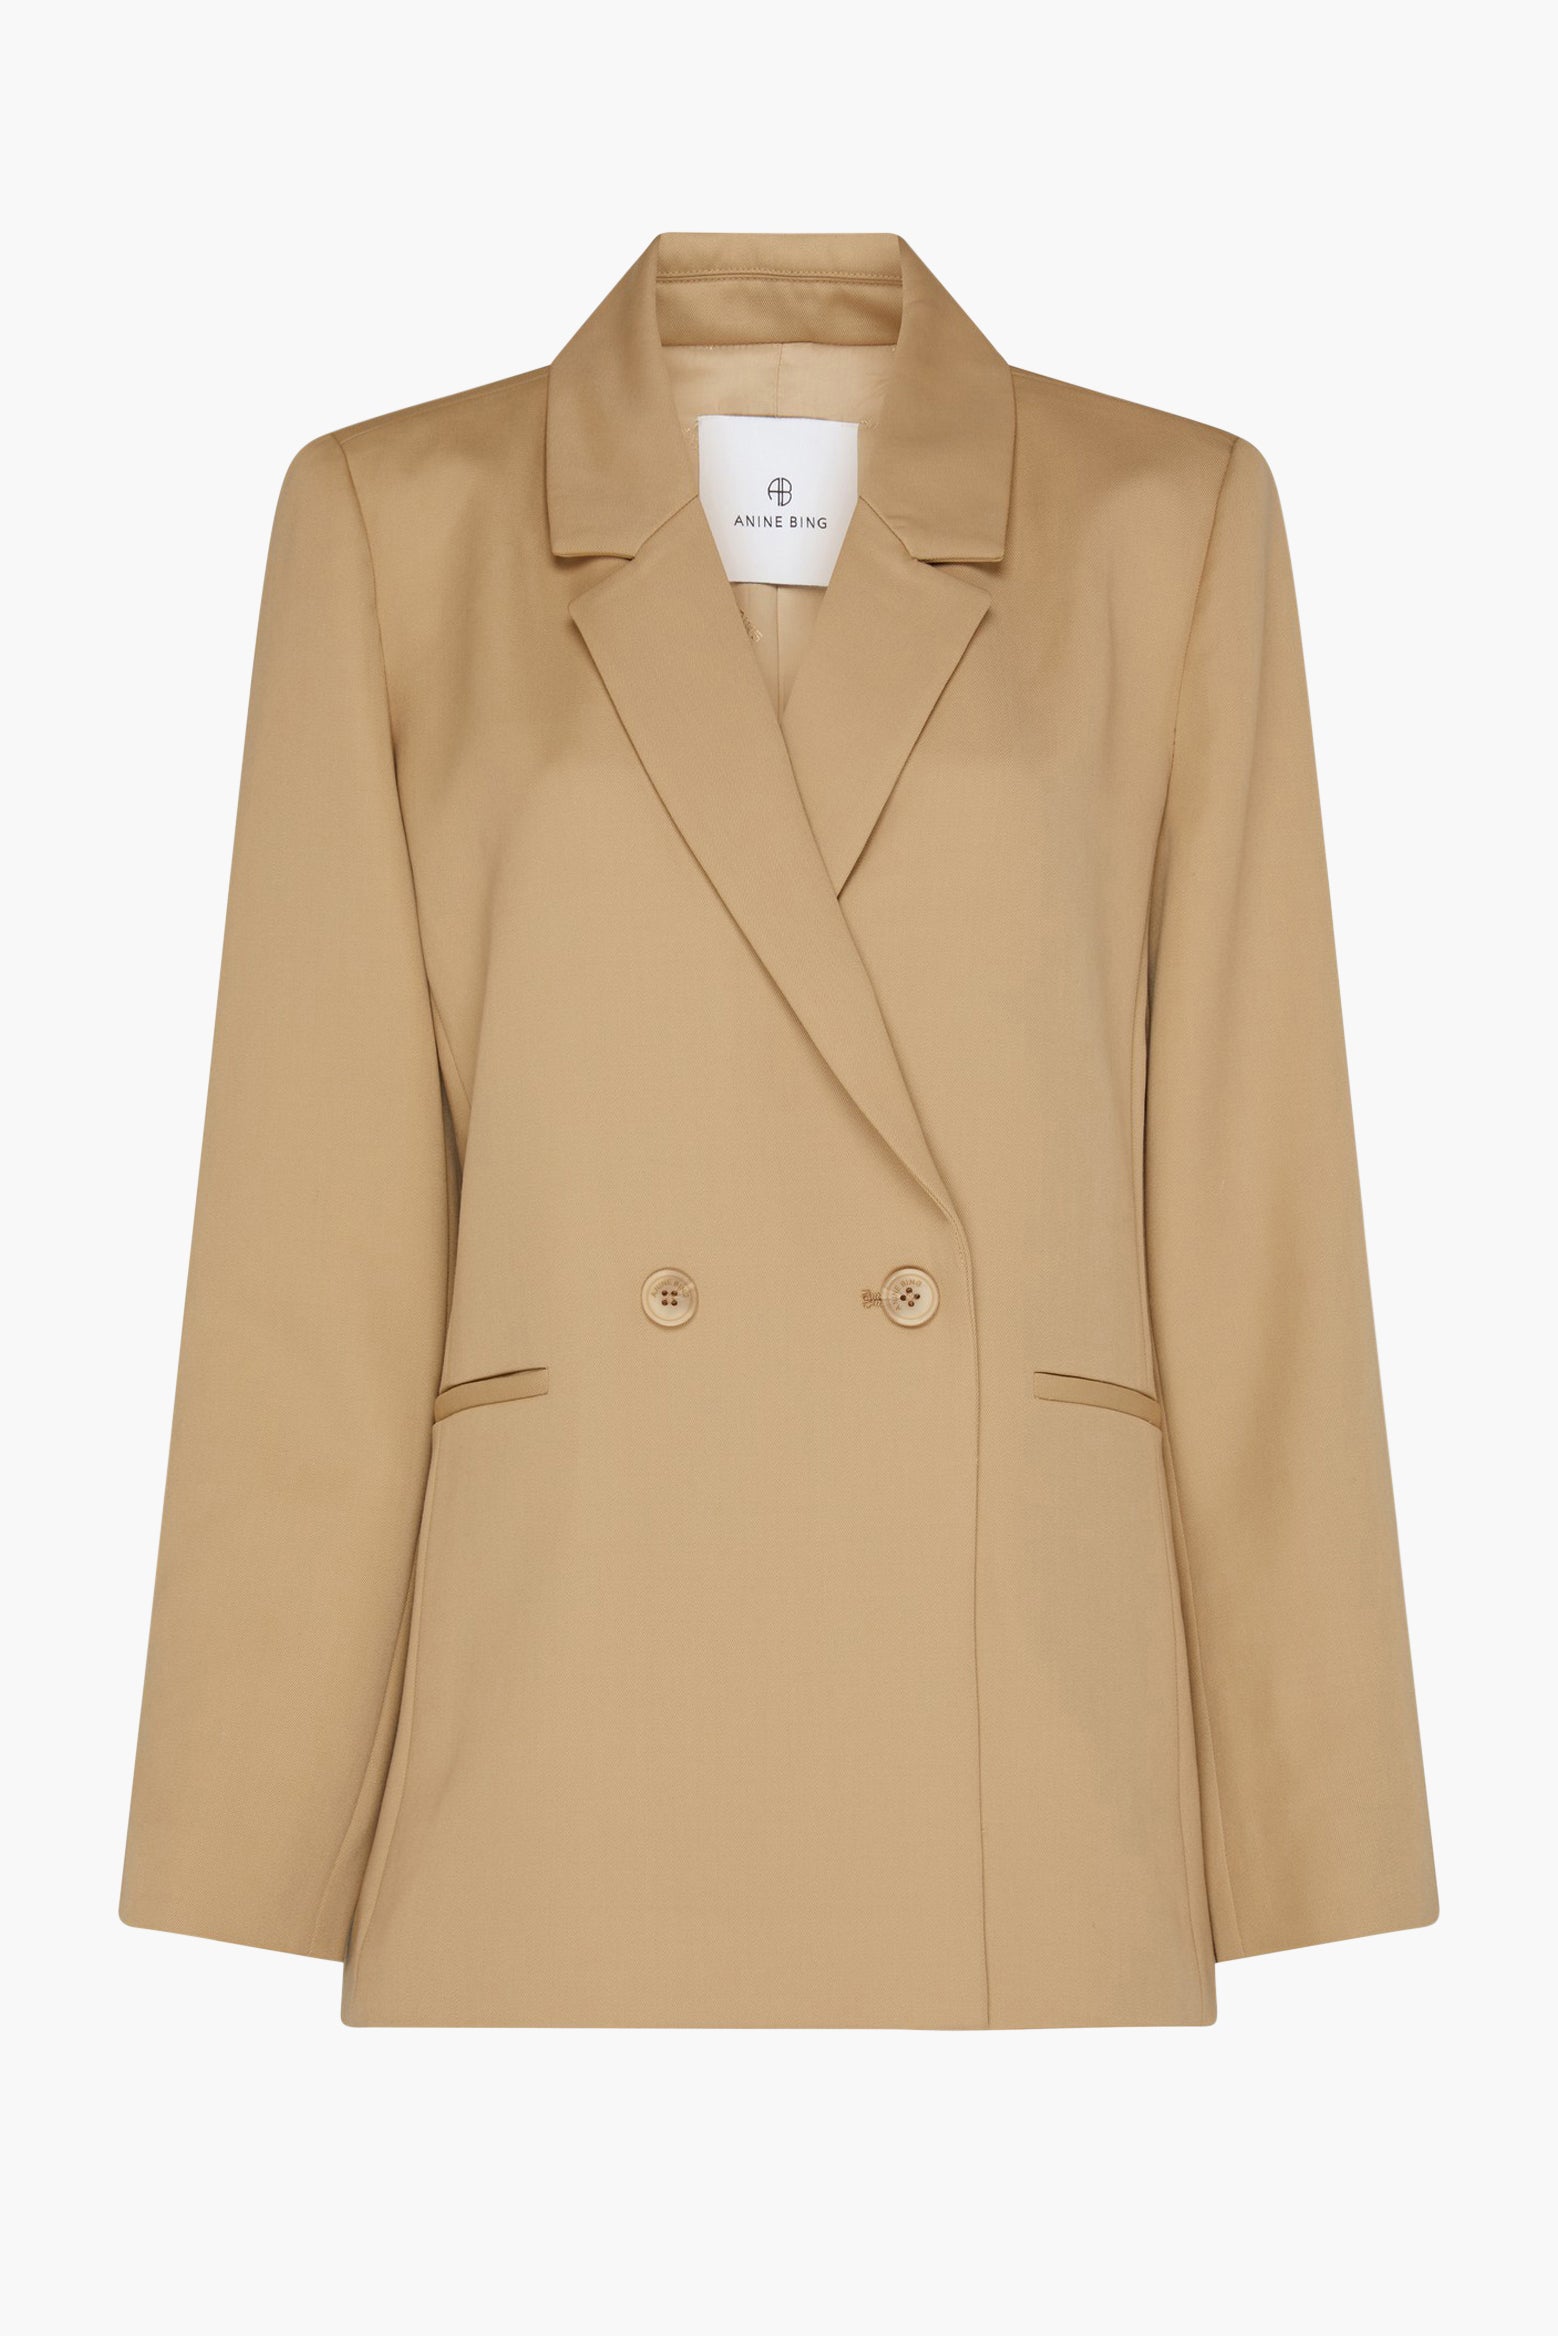 Anine Bing Madeleine Blazer in Deep Tan available at TNT The New Trend Australia.